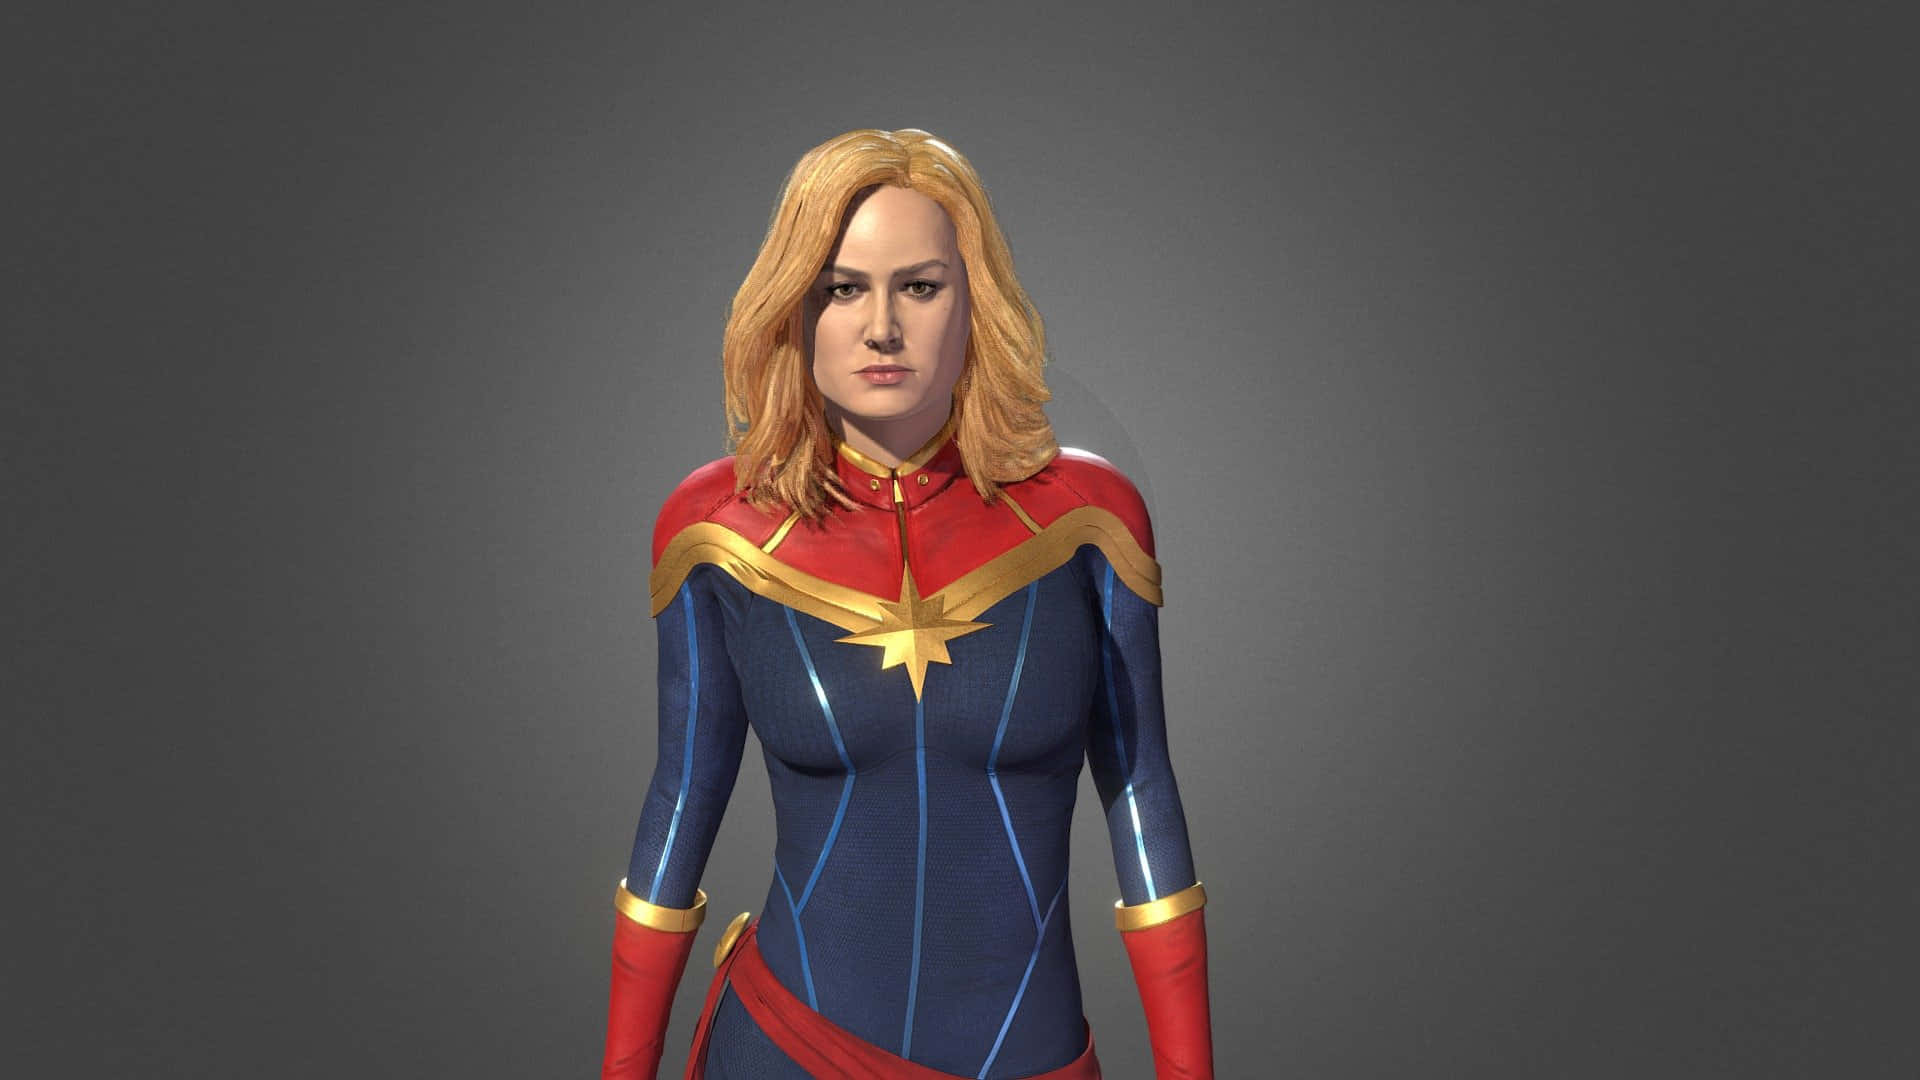 Get the 3D experience of Captain Marvel with this amazing wallpaper. Wallpaper